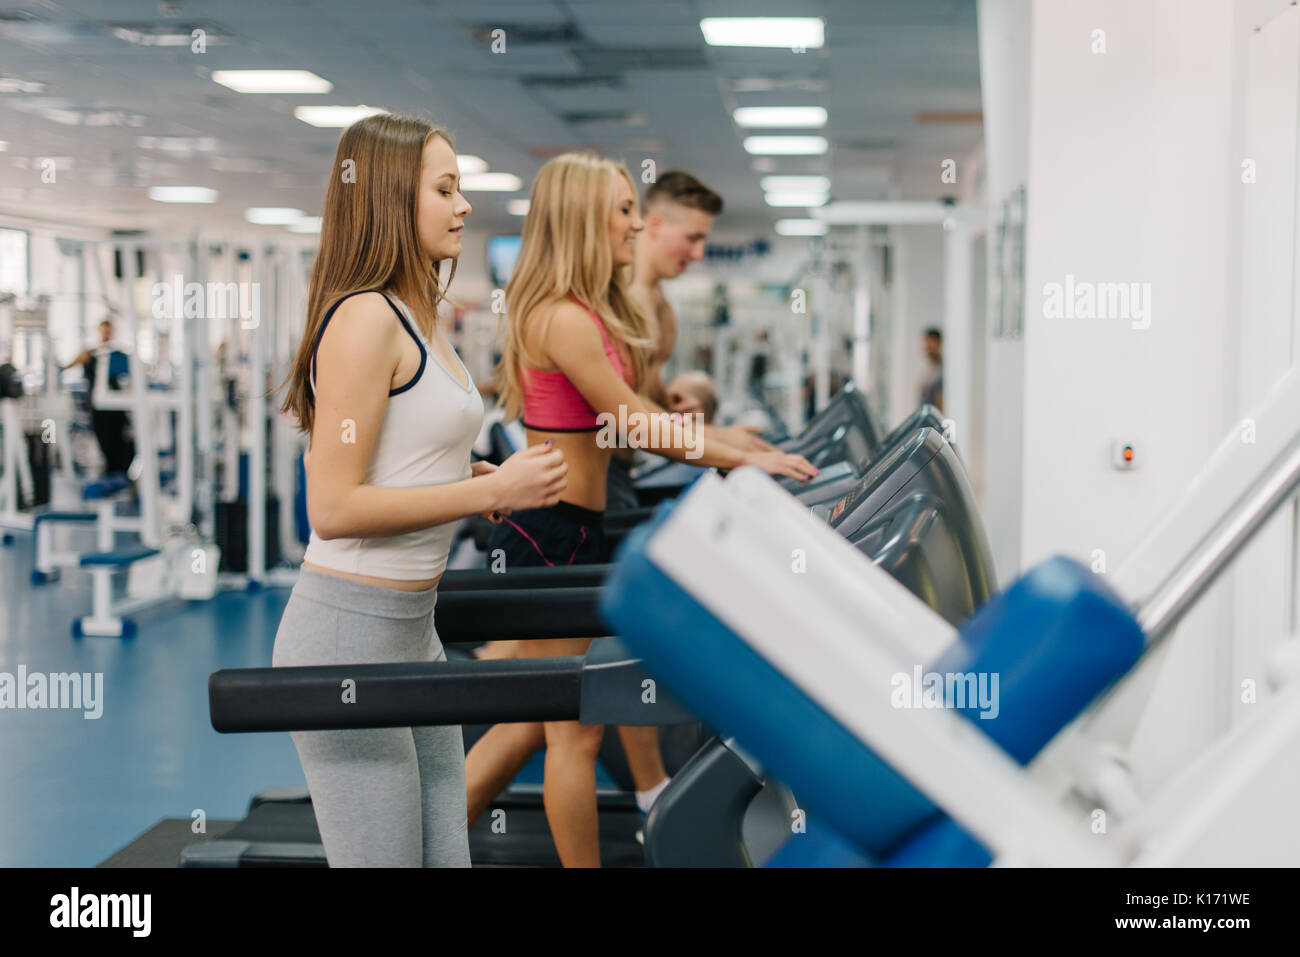 group of young people running on treadmills in gym. Blonde girl set a pace of her running. Stock Photo